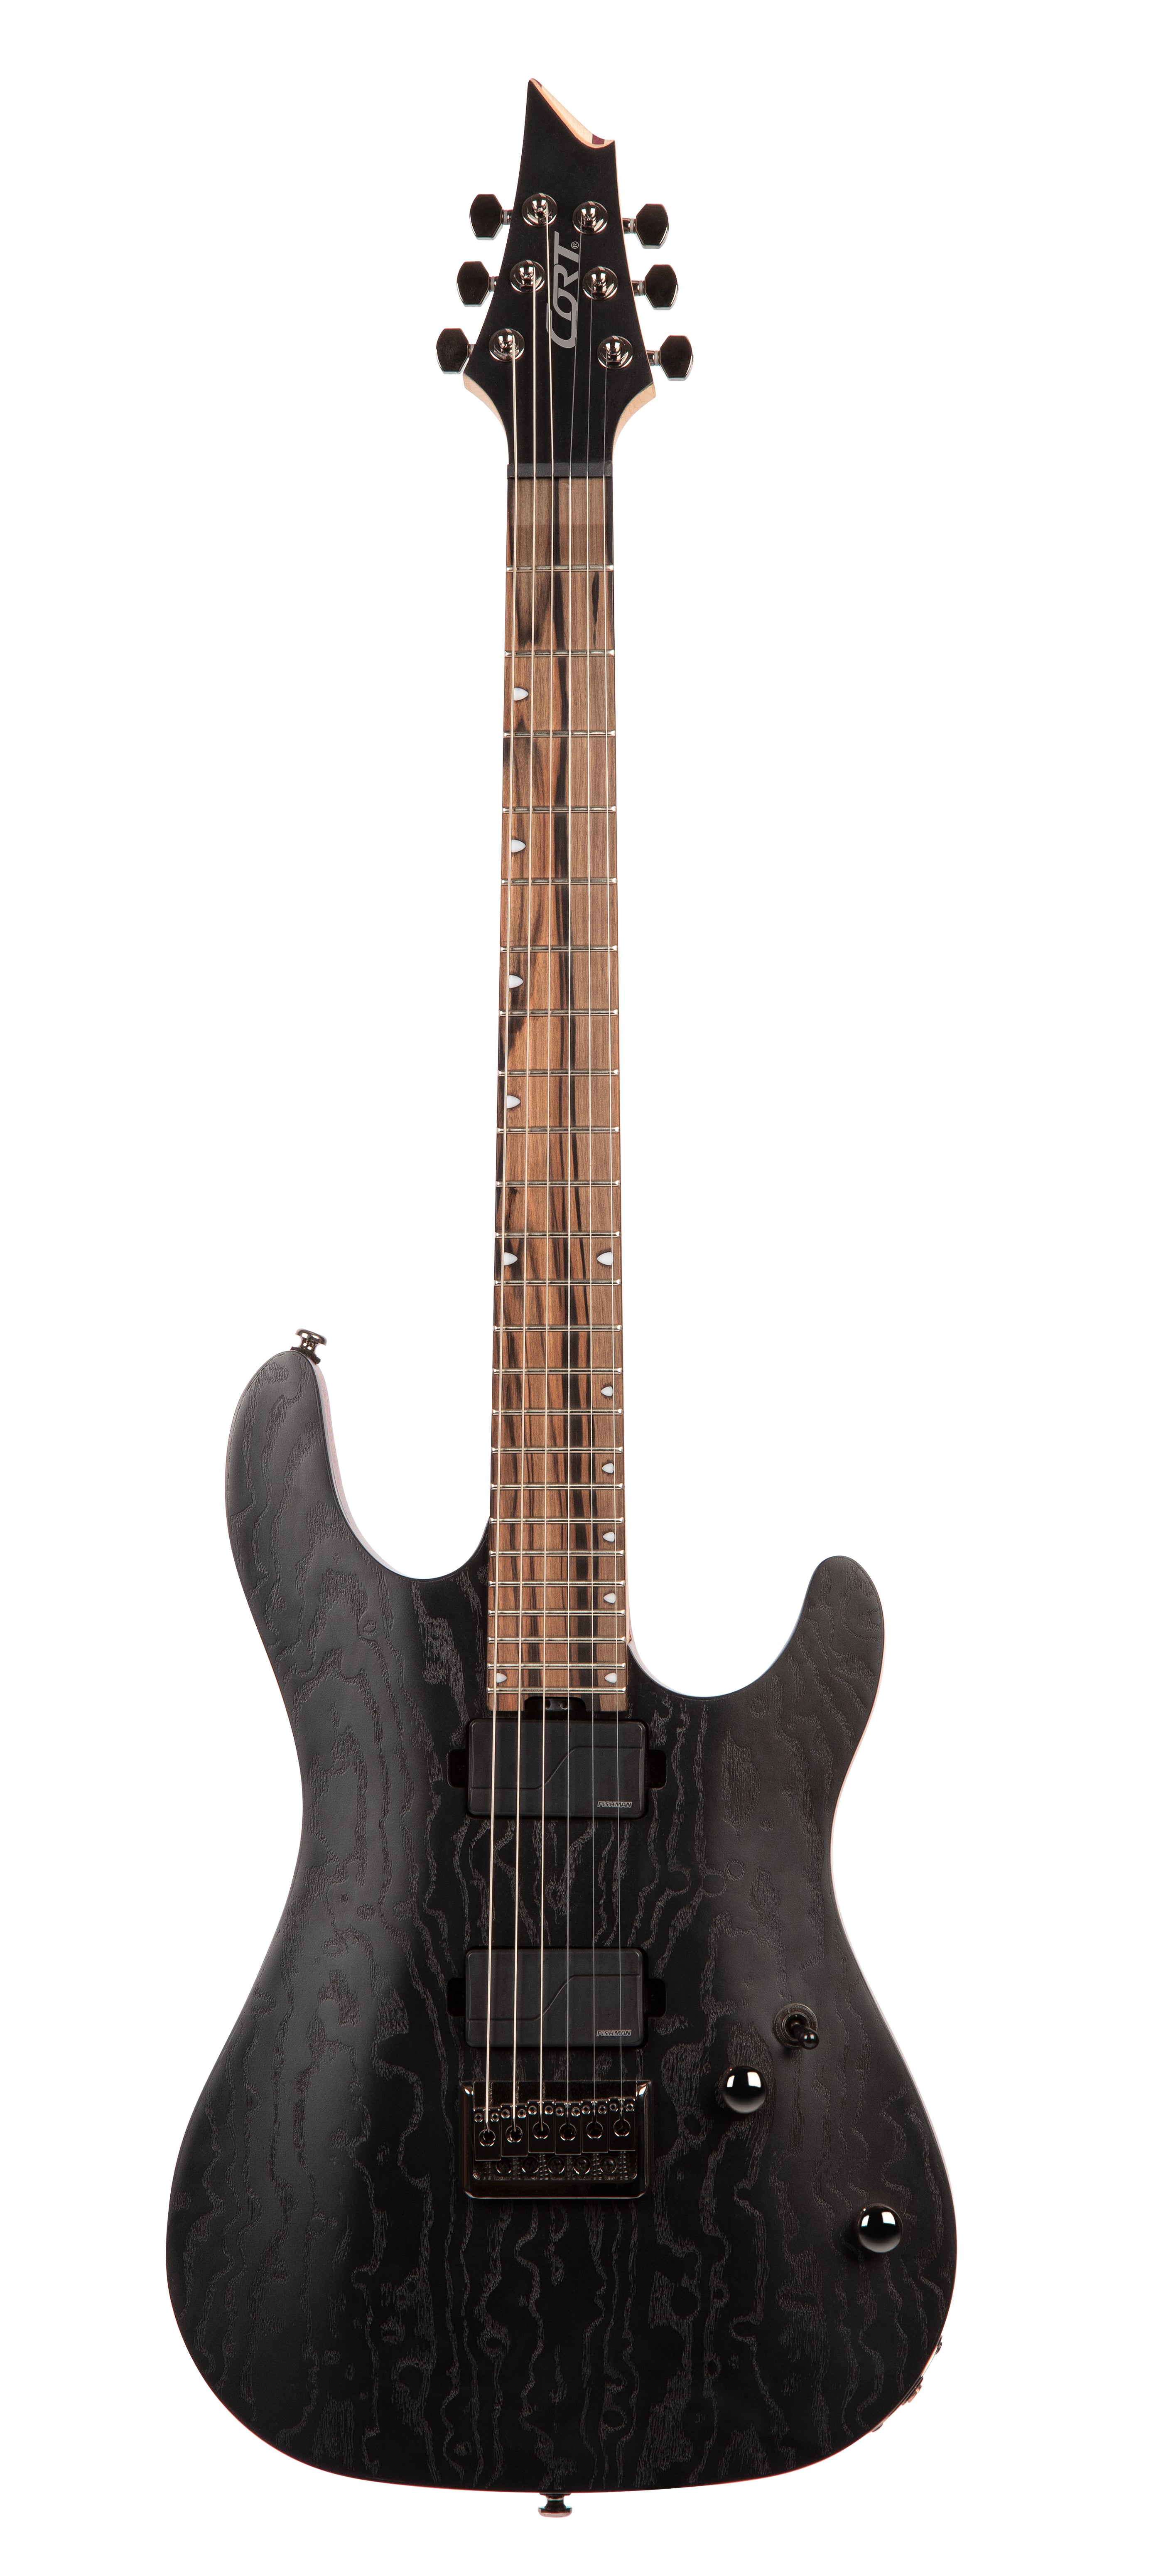 Cort KX500 Etched Black, Electric Guitar for sale at Richards Guitars.